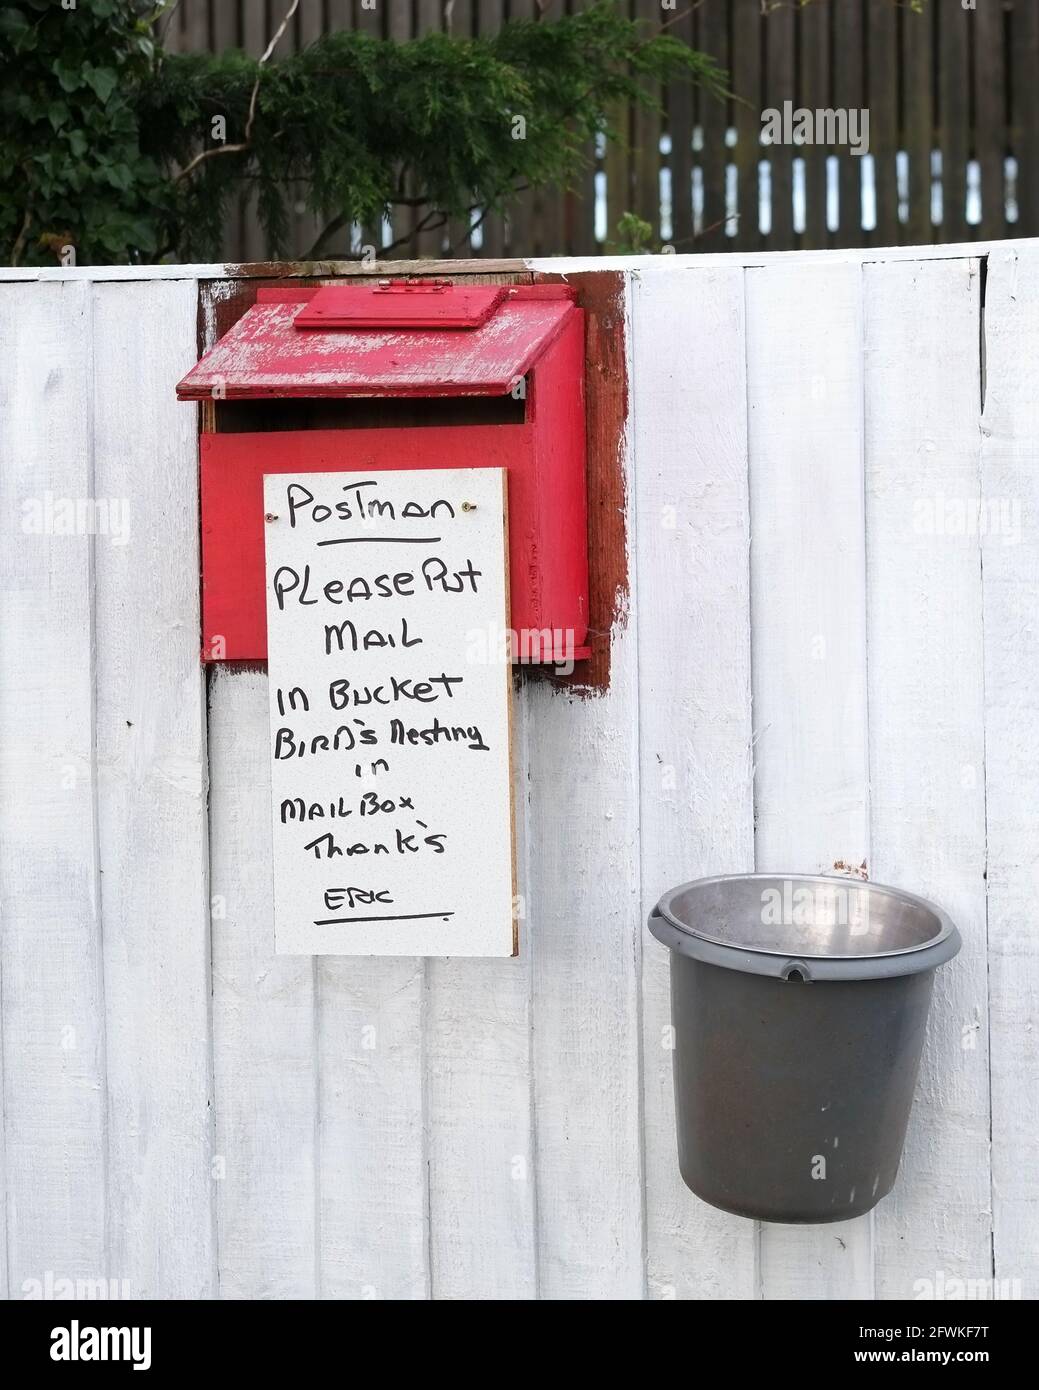 May 2021 - Note on a farm letter box stating there are bird's nesting inside. Stock Photo